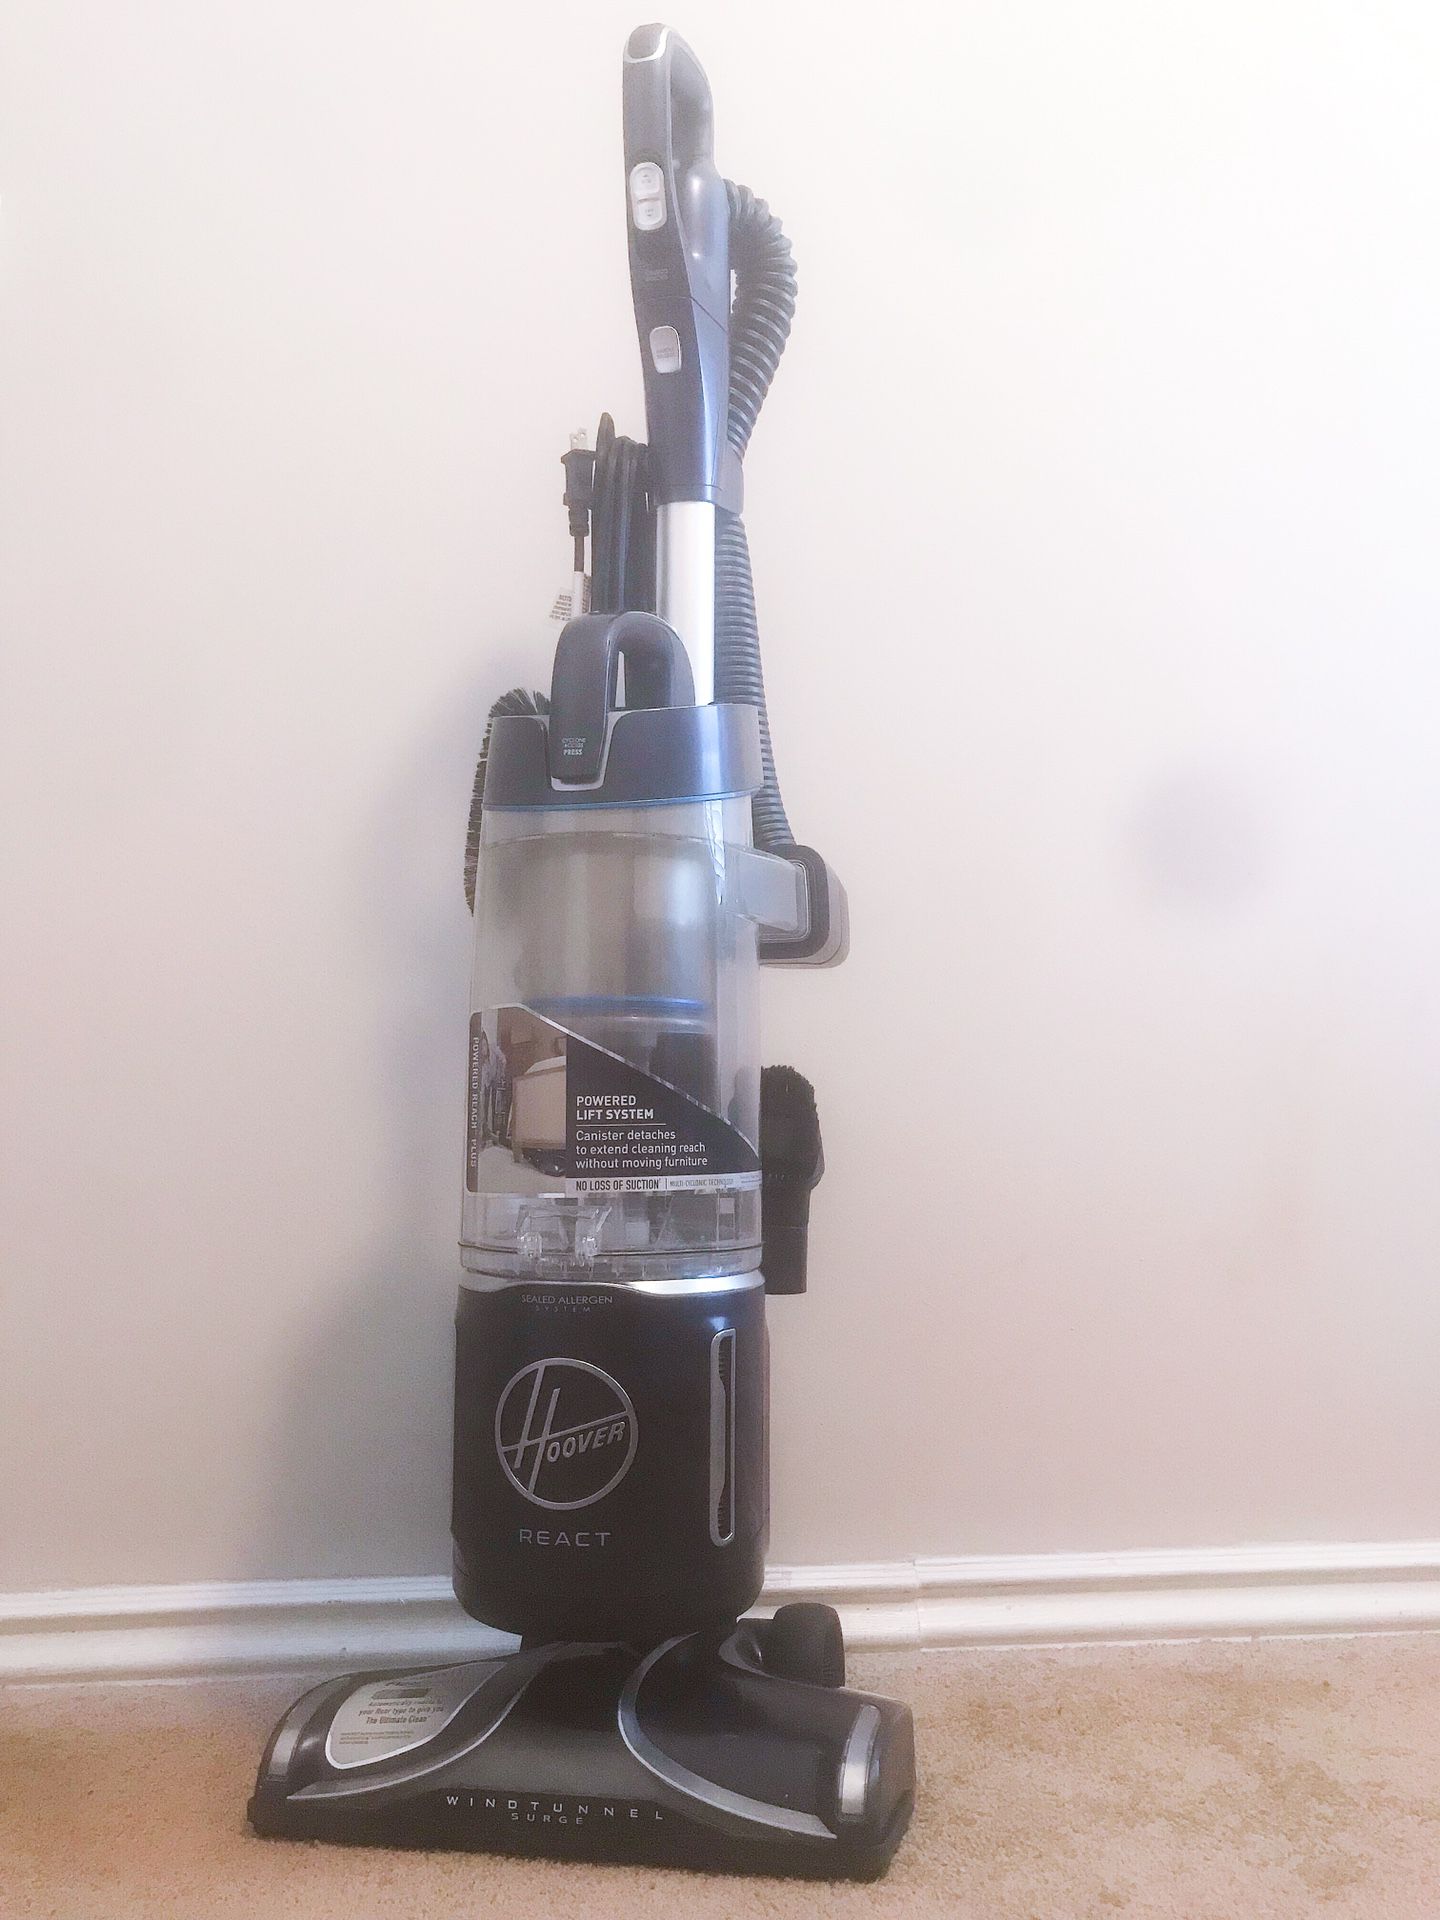 Hoover React Reach Plus Windtunnel Surge Upright Vacuum Cleaner UH73510